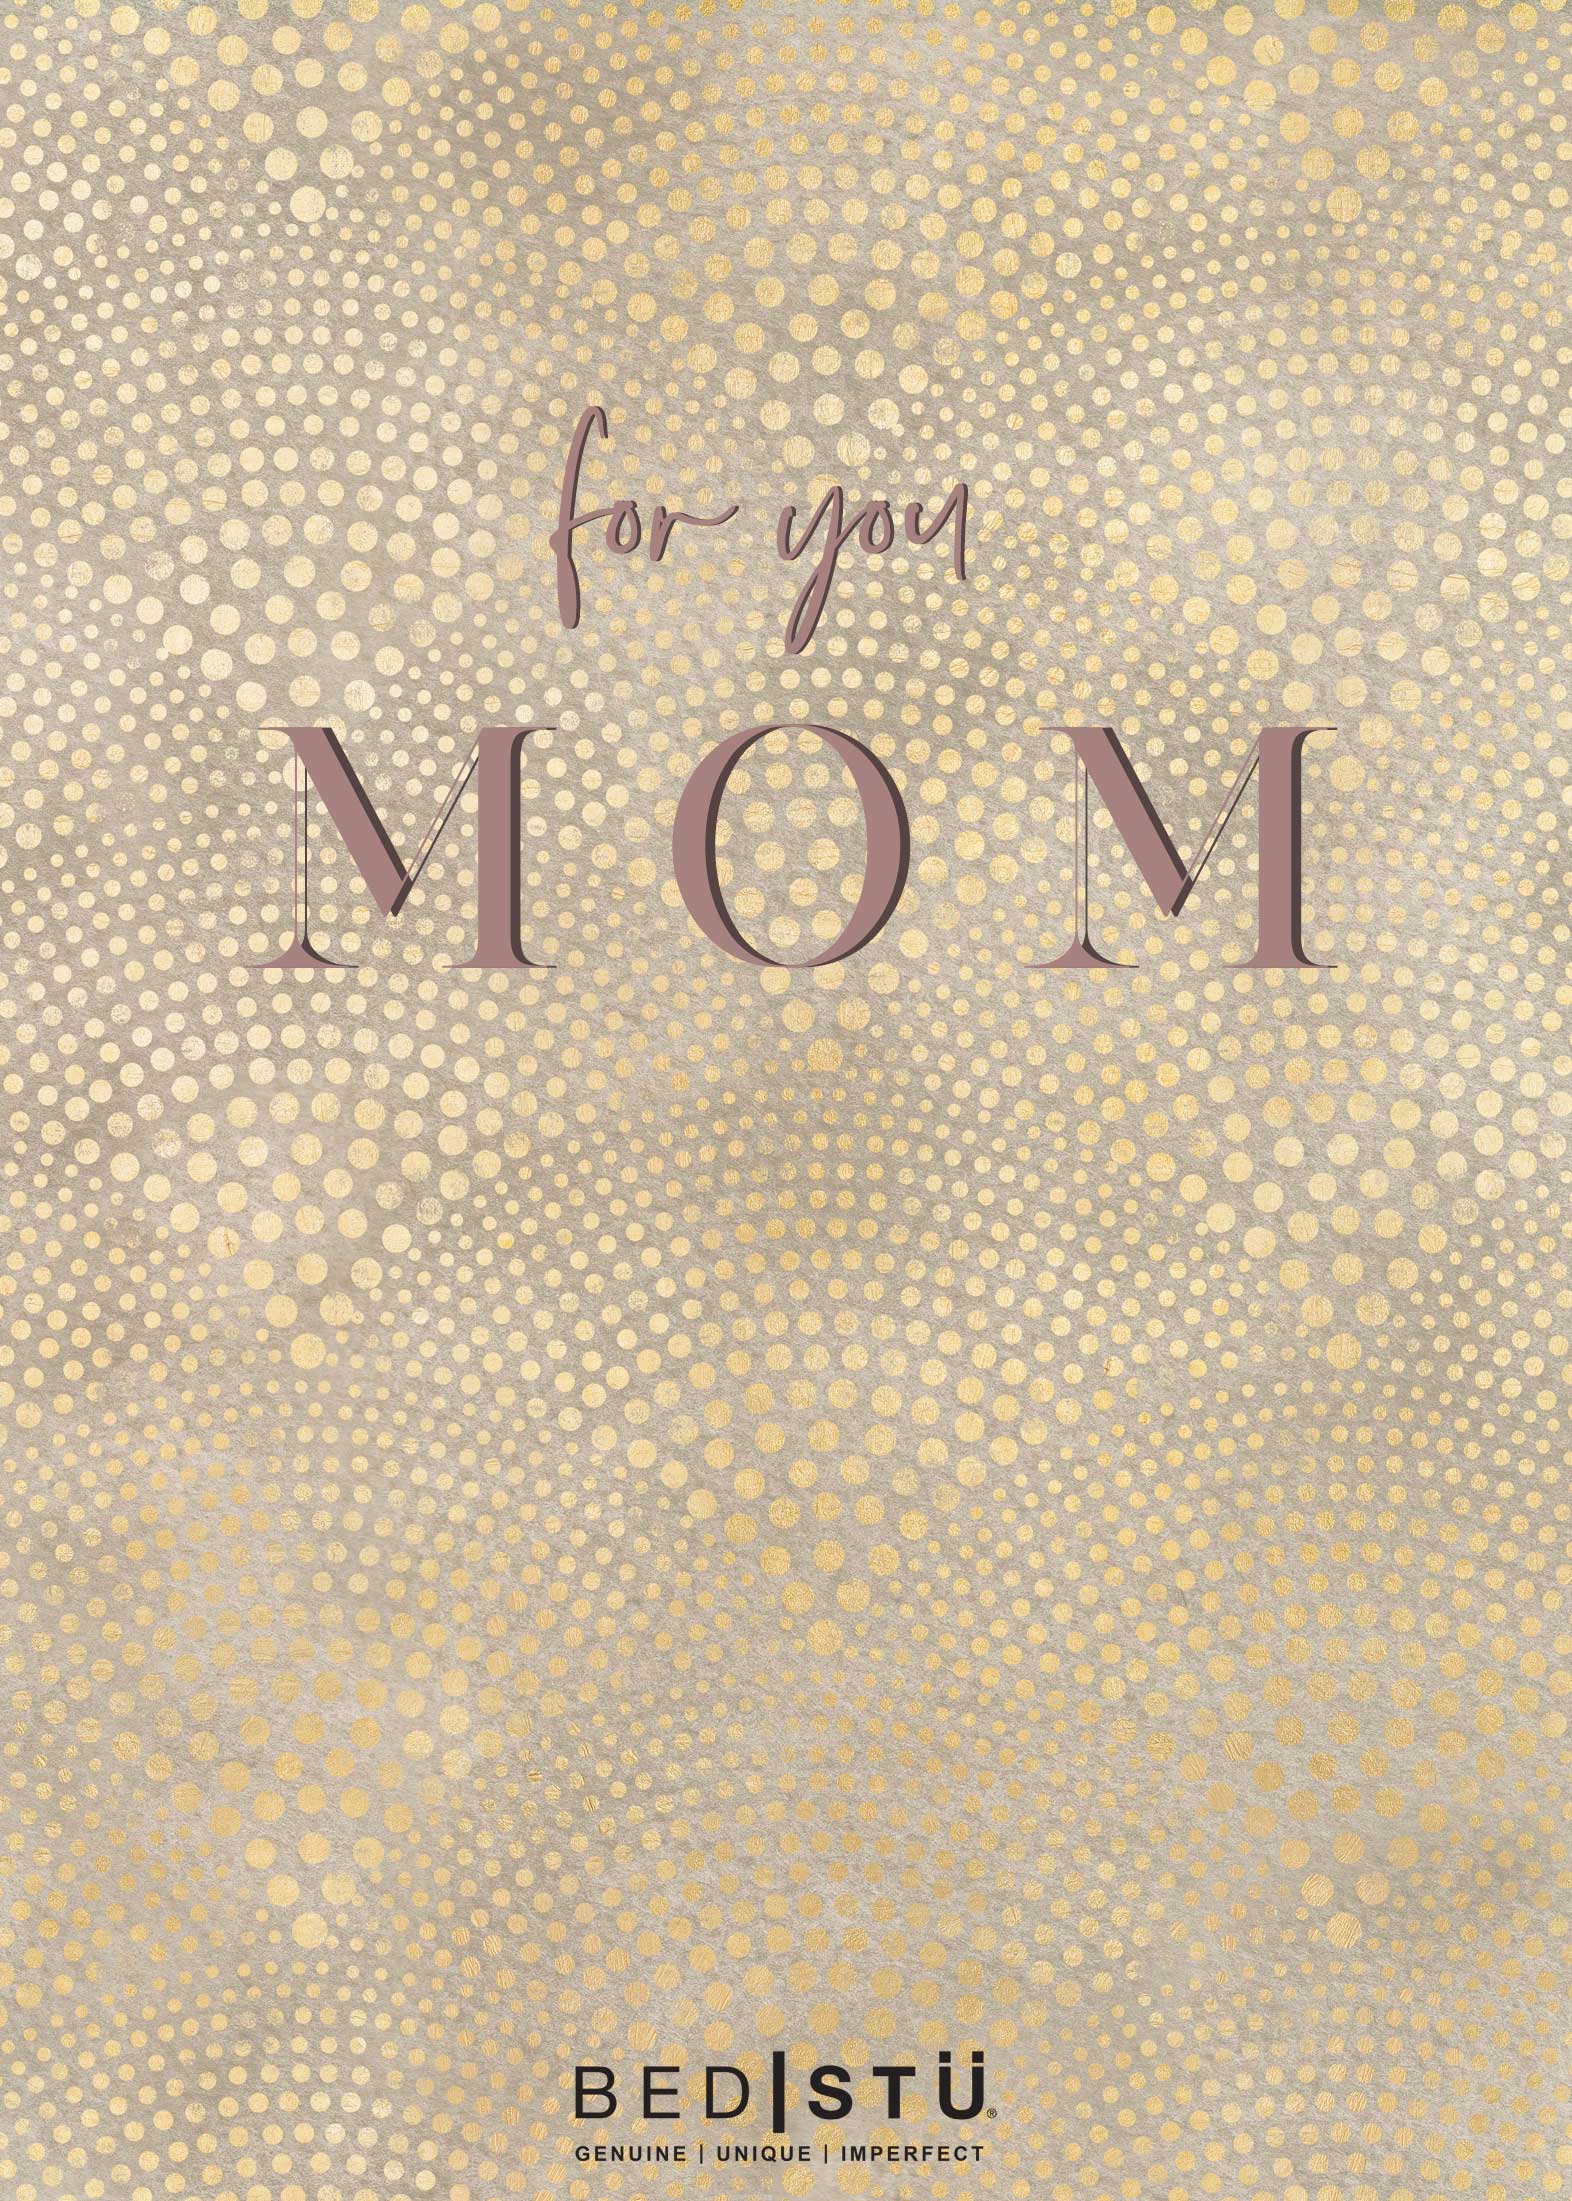 Text "For You Mom" in large letters on a sparkling golden background with a polka dot pattern, and the word "Bed|Stü" at the bottom.